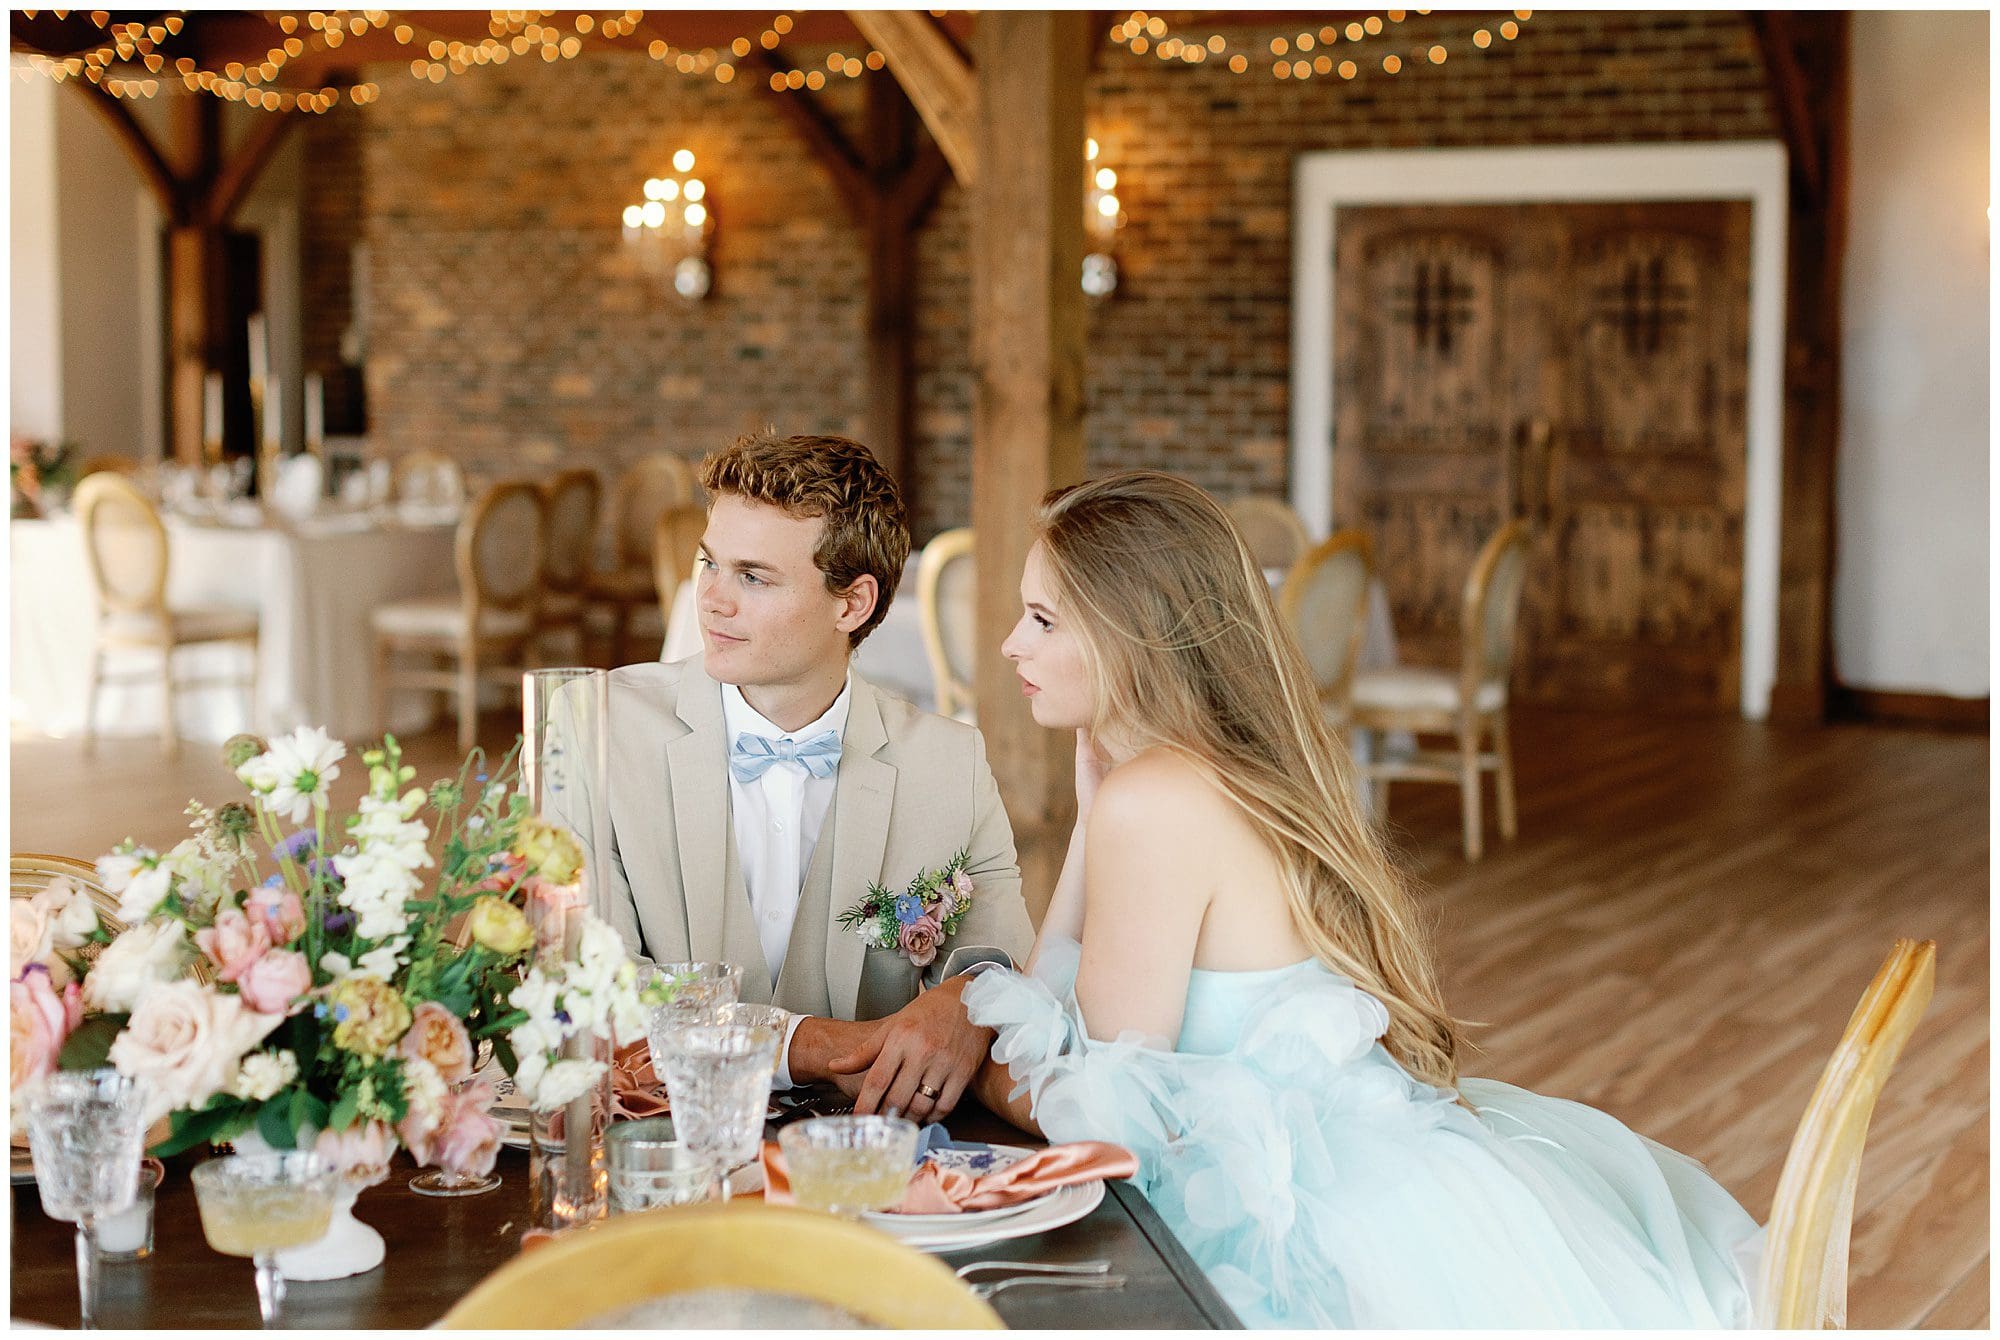 A Parisian-inspired summer wedding at The Ridge, with a bride and groom sitting at a table during the reception.